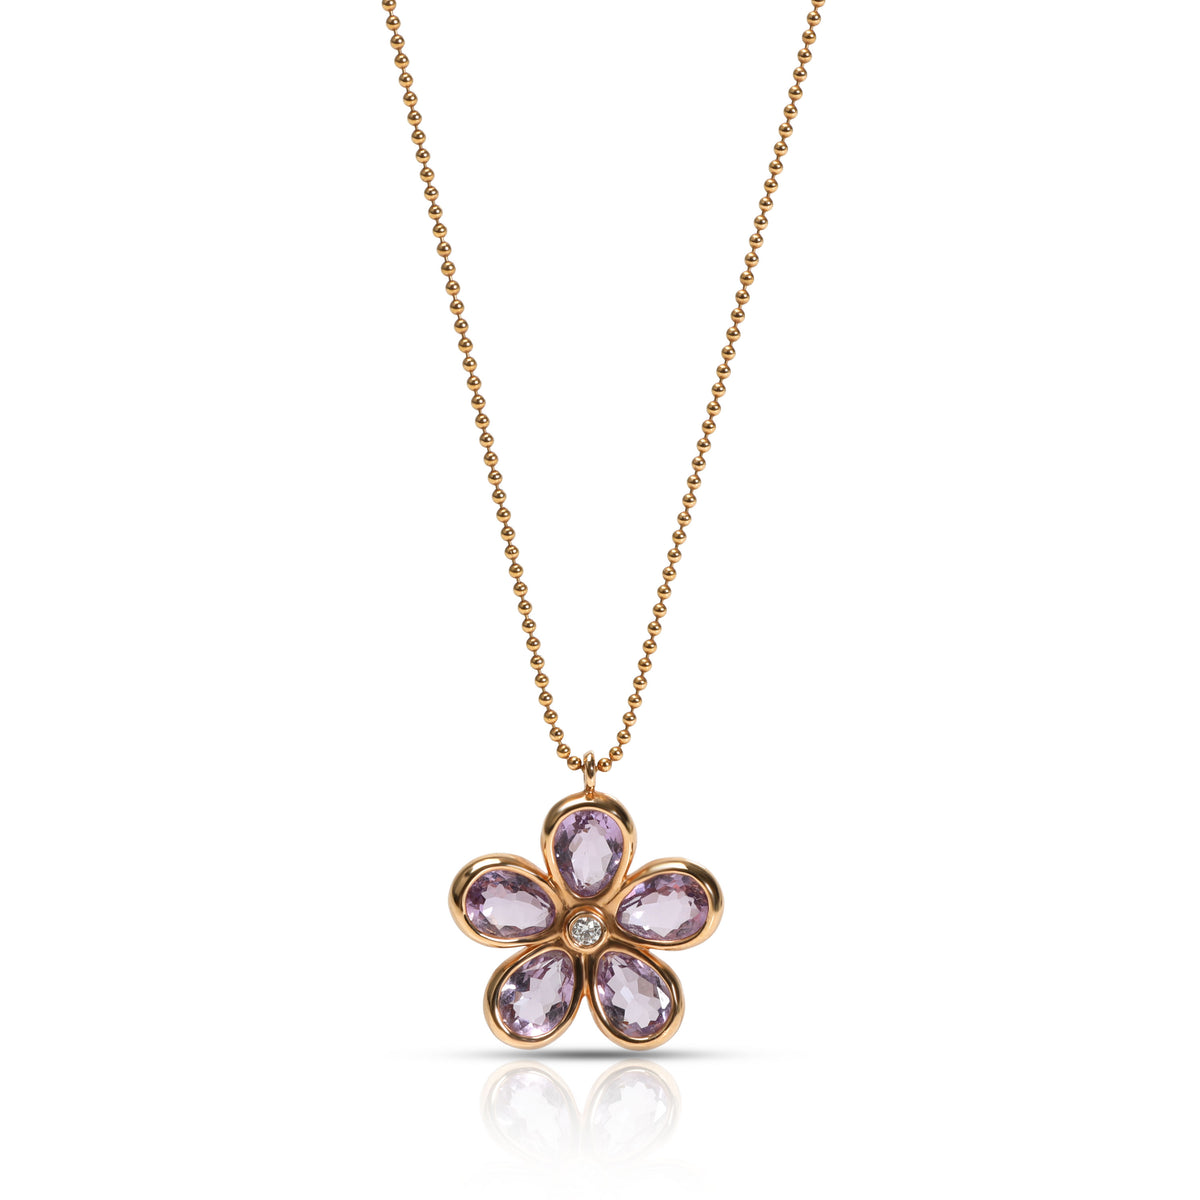 Tiffany & Co. Enchant Diamond Amethyst Necklace in 18K Rose Gold 0.02 CT